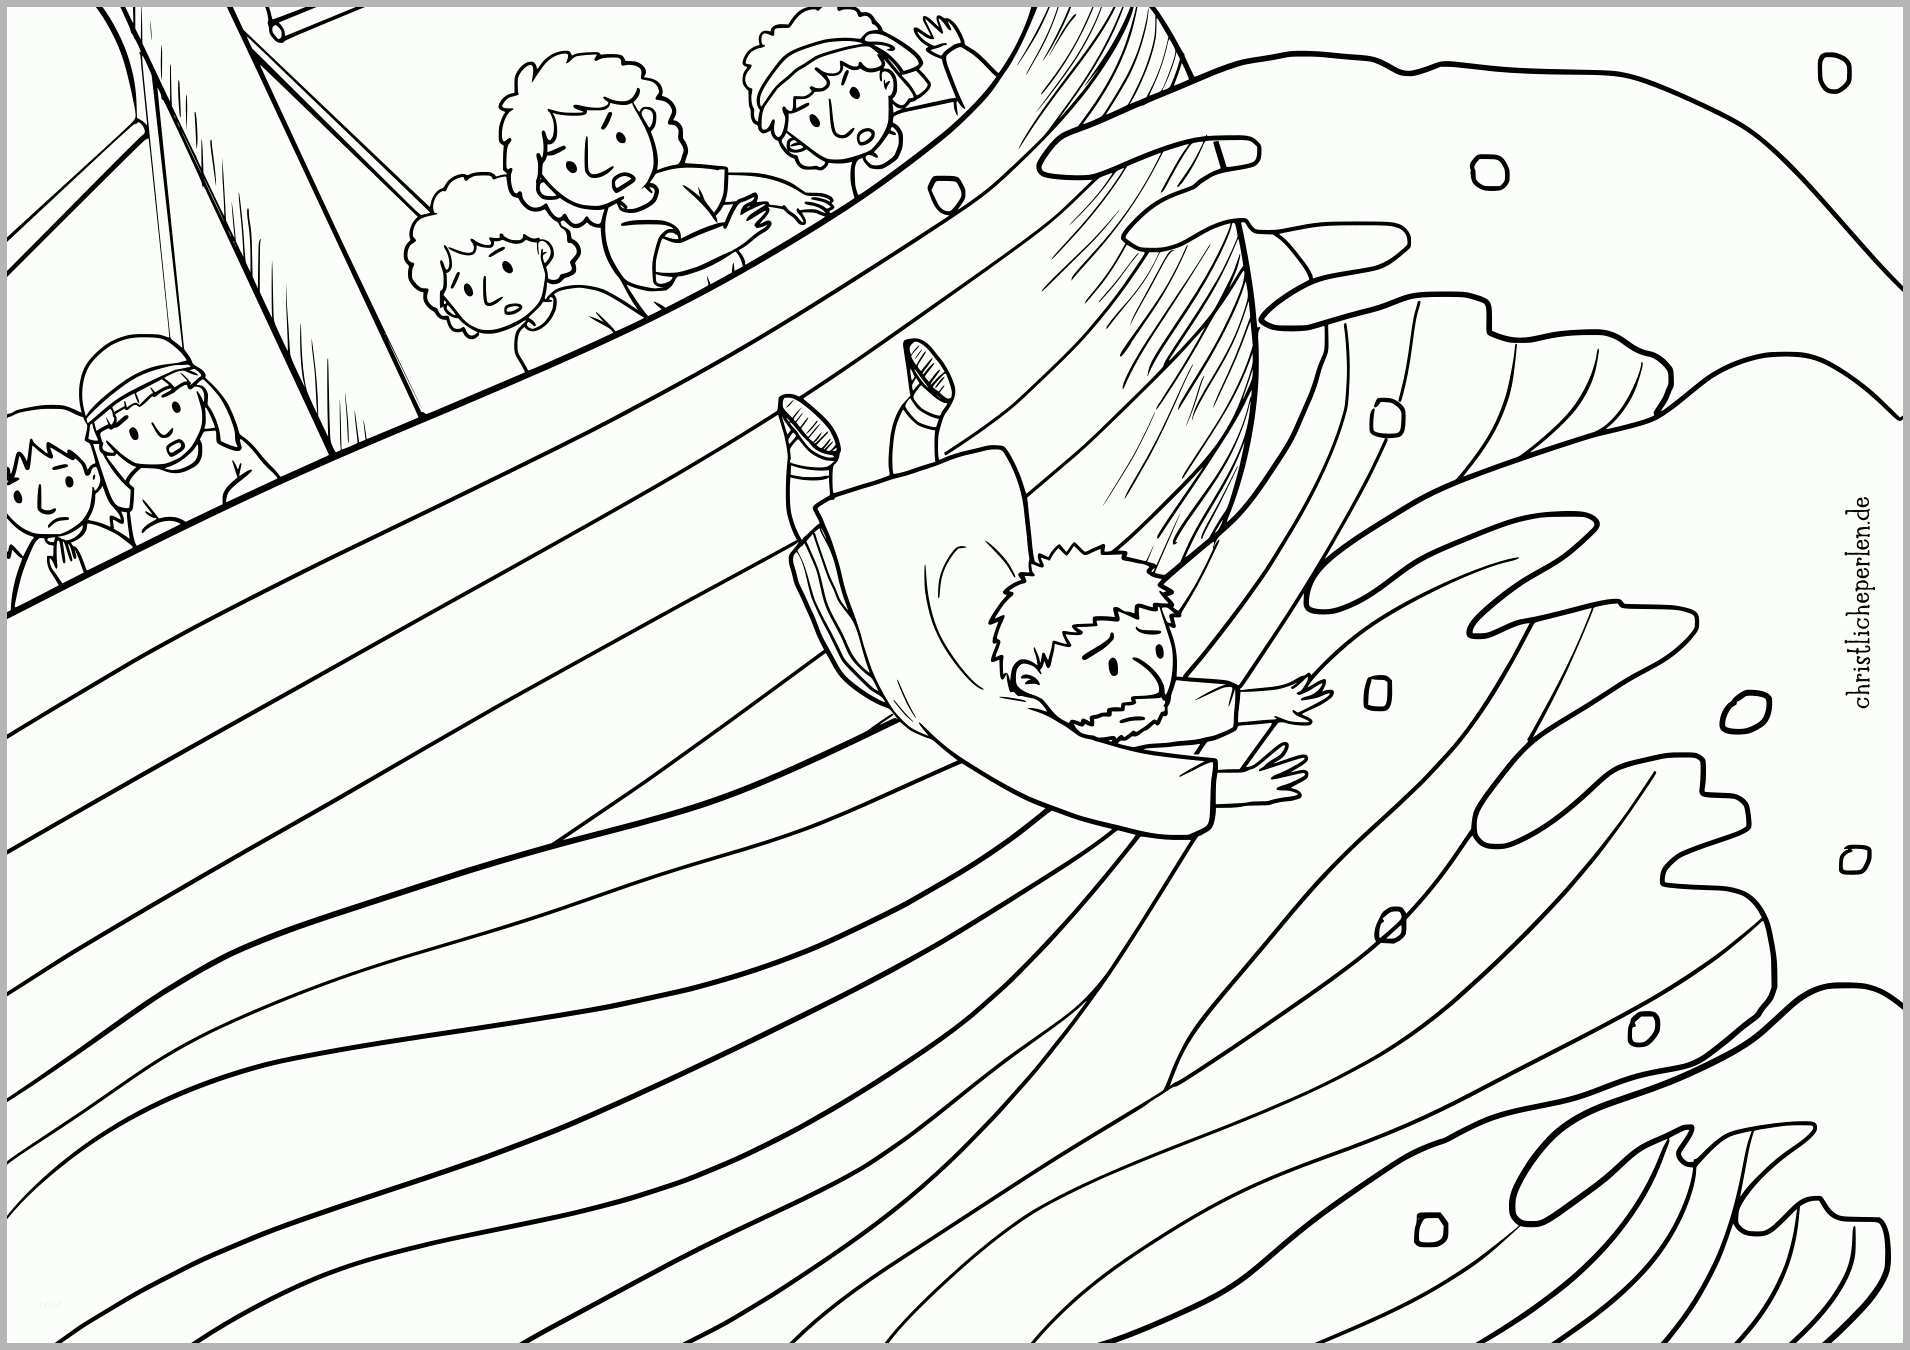 Modisch Jona Im Wal Ausmalbilder Jonah In the Whale Coloring Pages